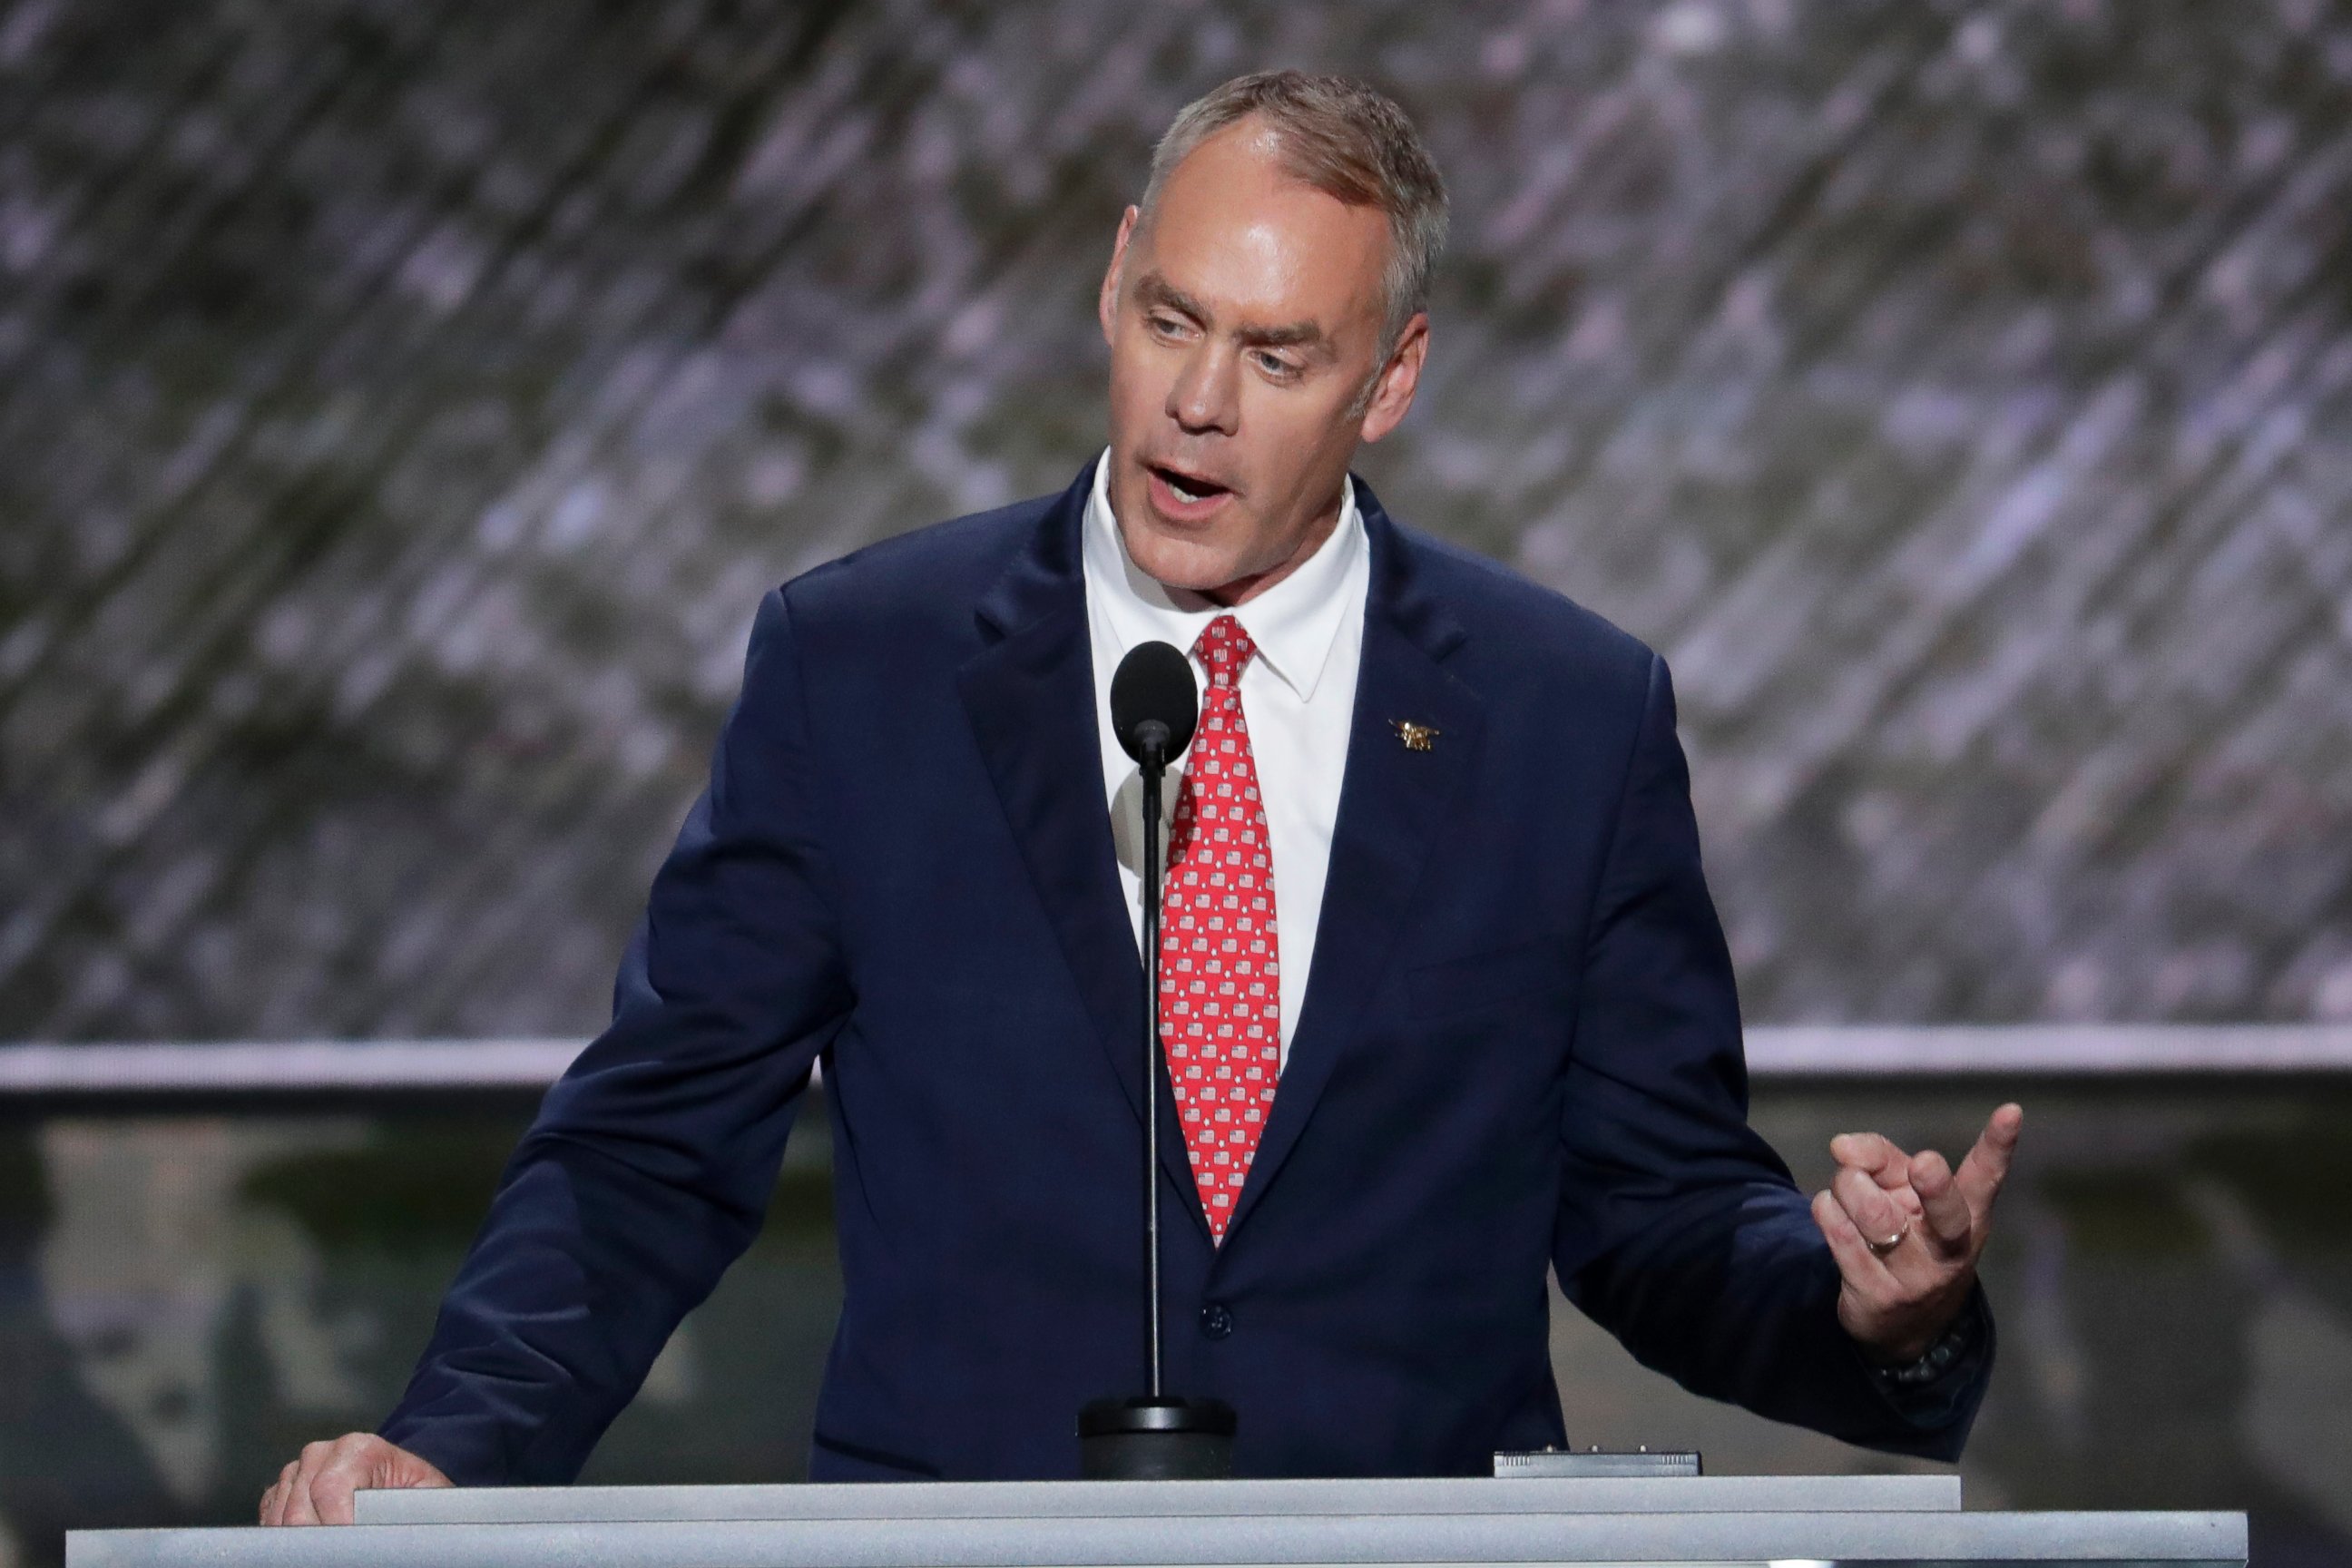 PHOTO: Rep. Ryan Zinke speaks during the opening day of the Republican National Convention in Cleveland, July 18, 2016.